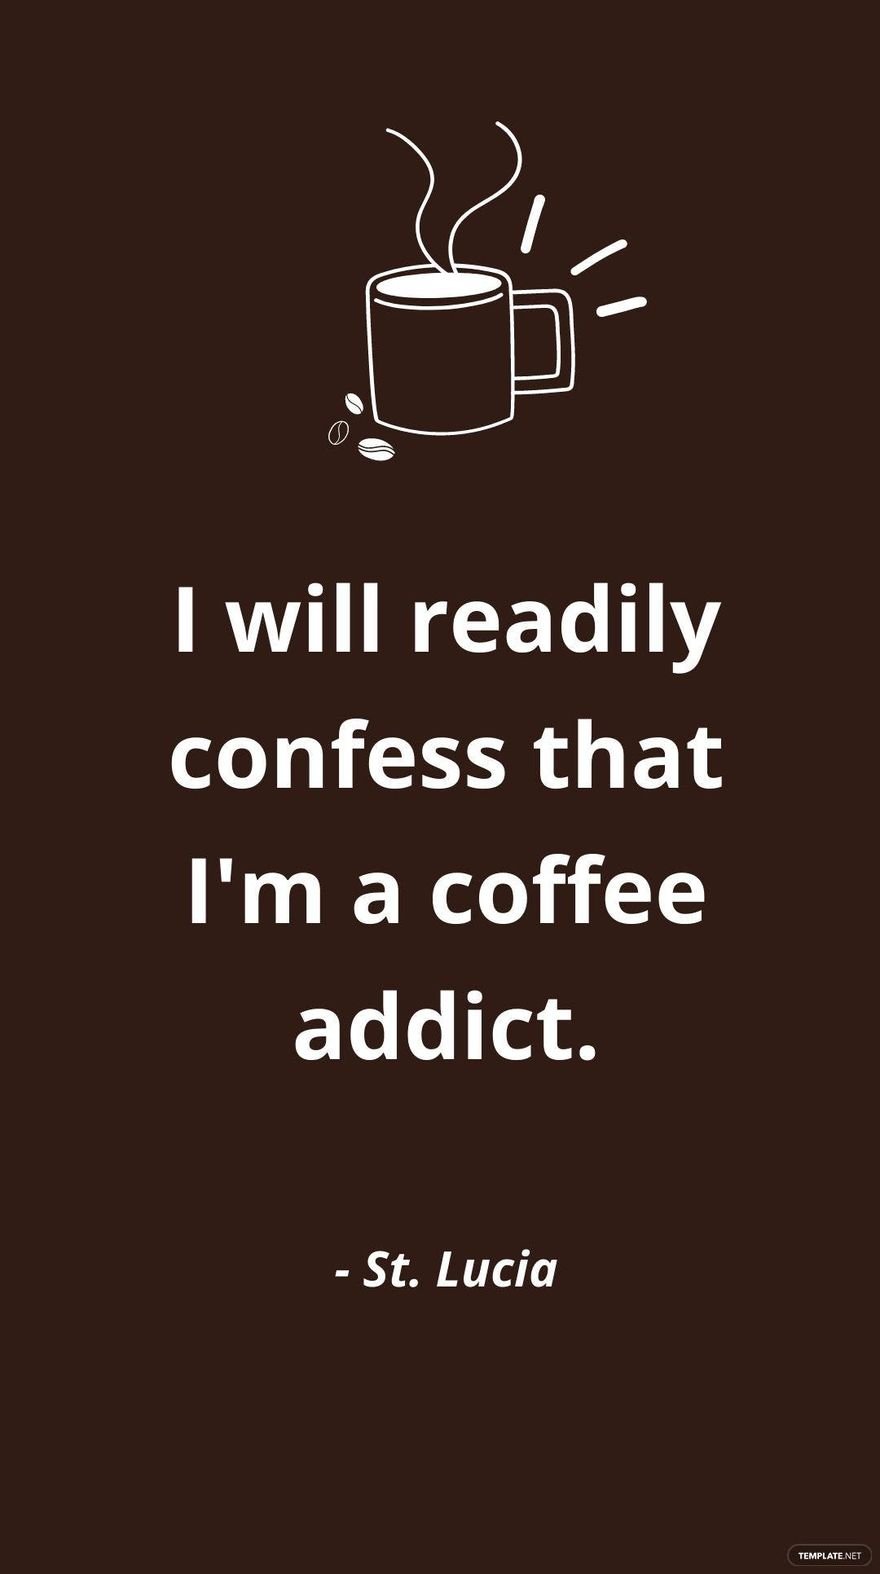 St. Lucia - I will readily confess that I'm a coffee addict.